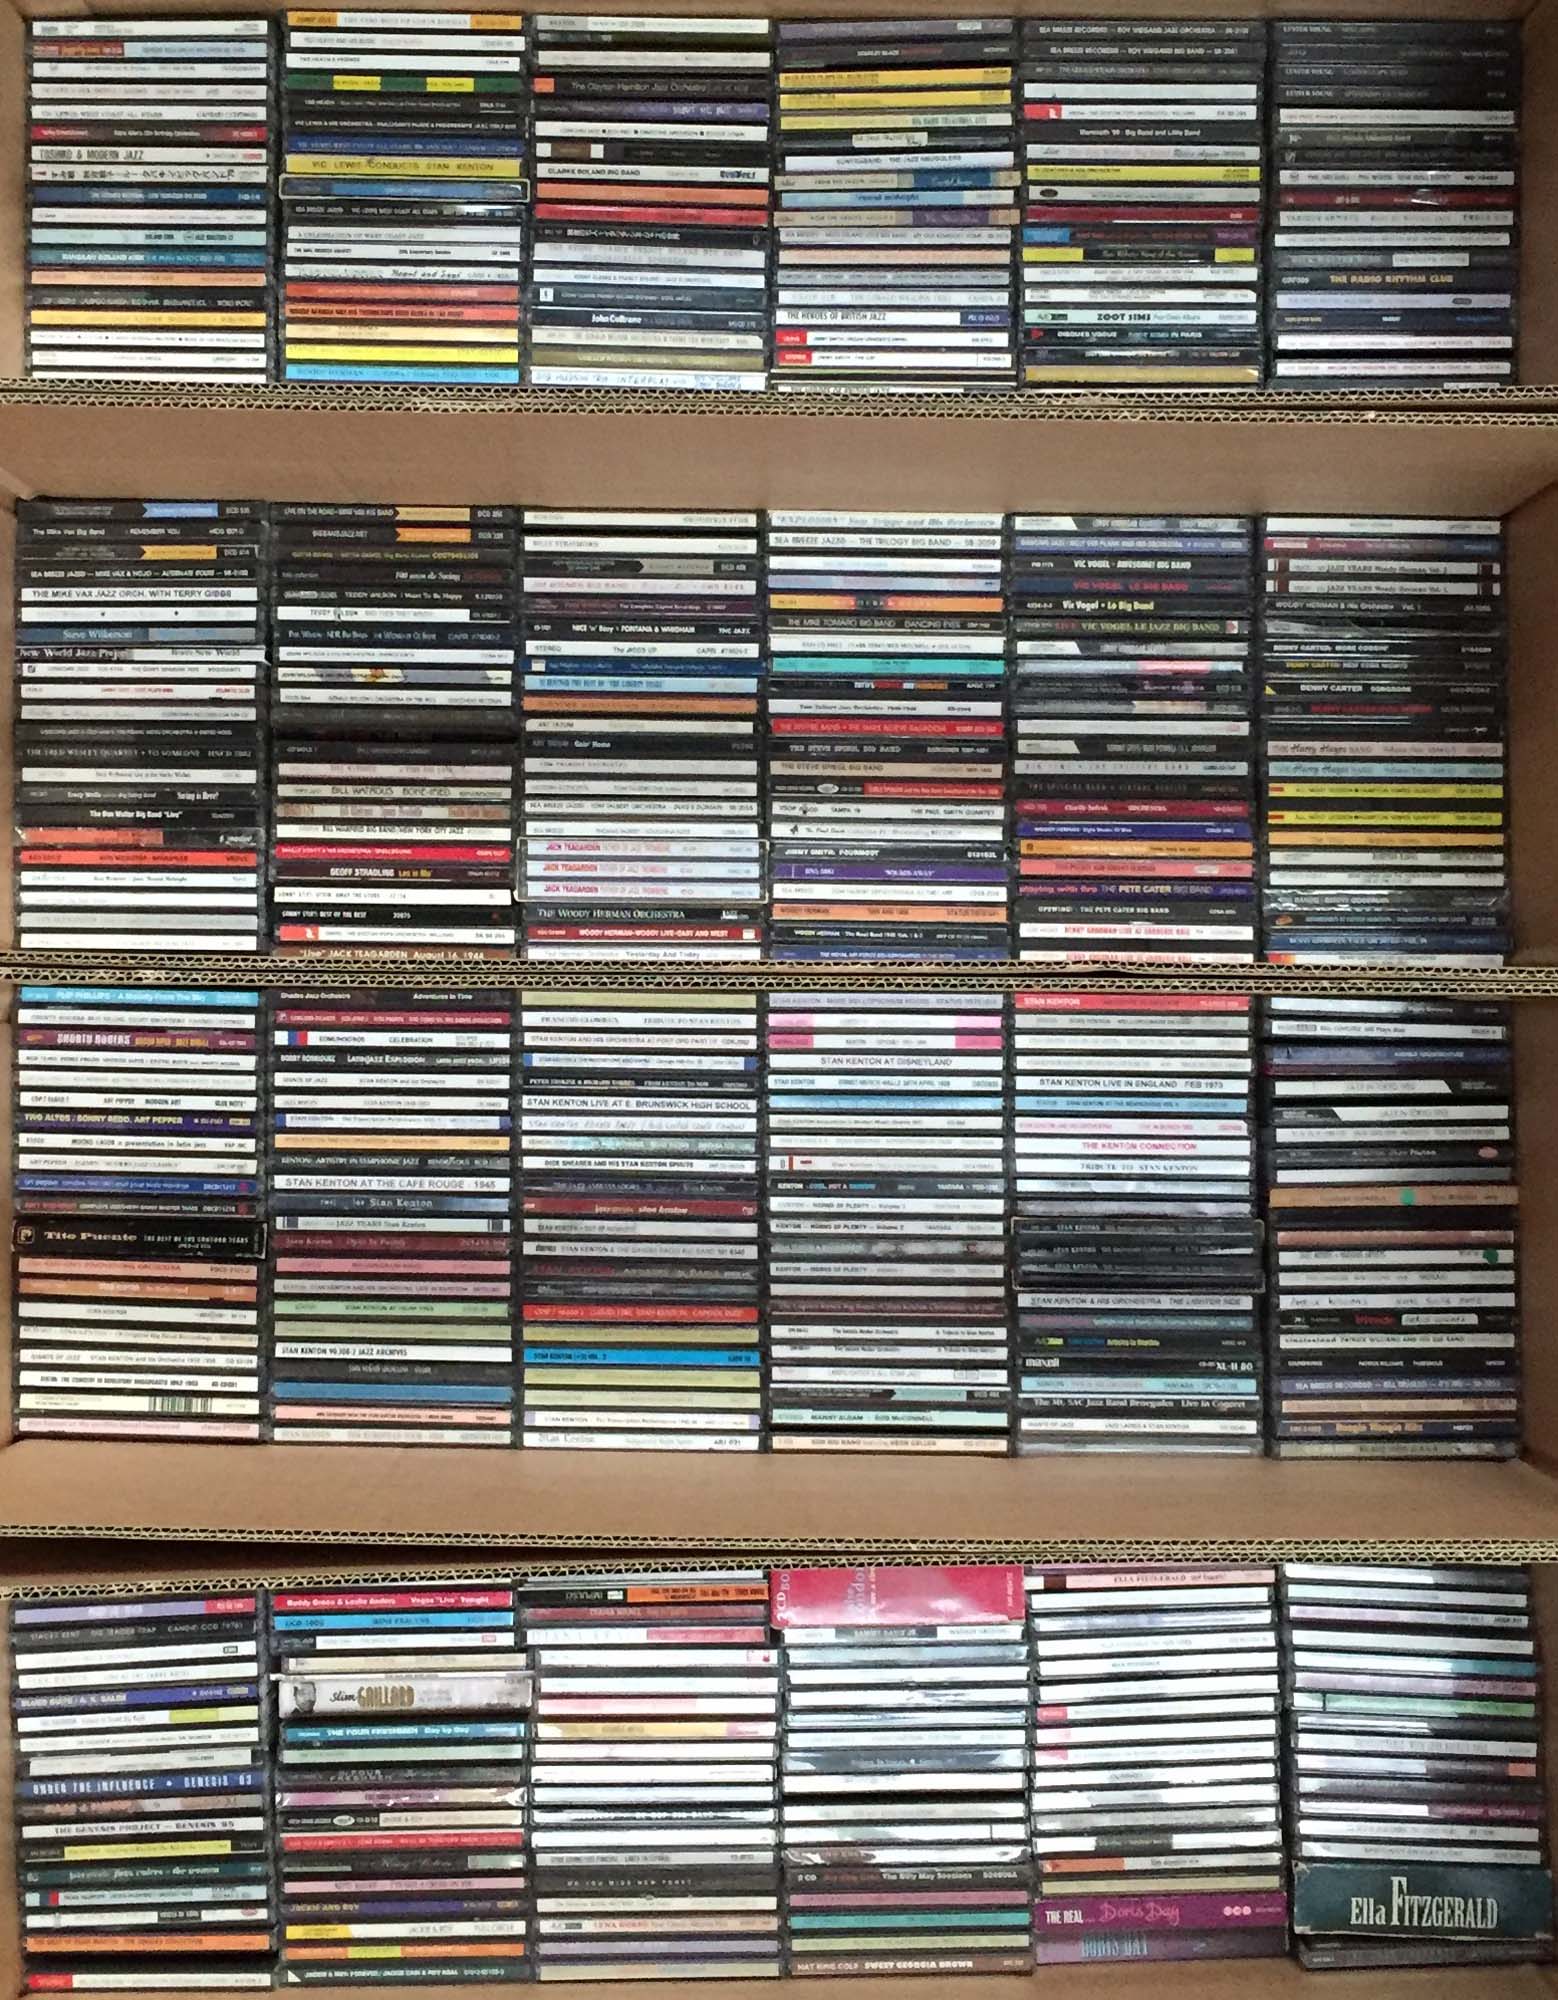 400 +JAZZ CDS. Excellent selection of Jazz CDs, with some box sets likely included.